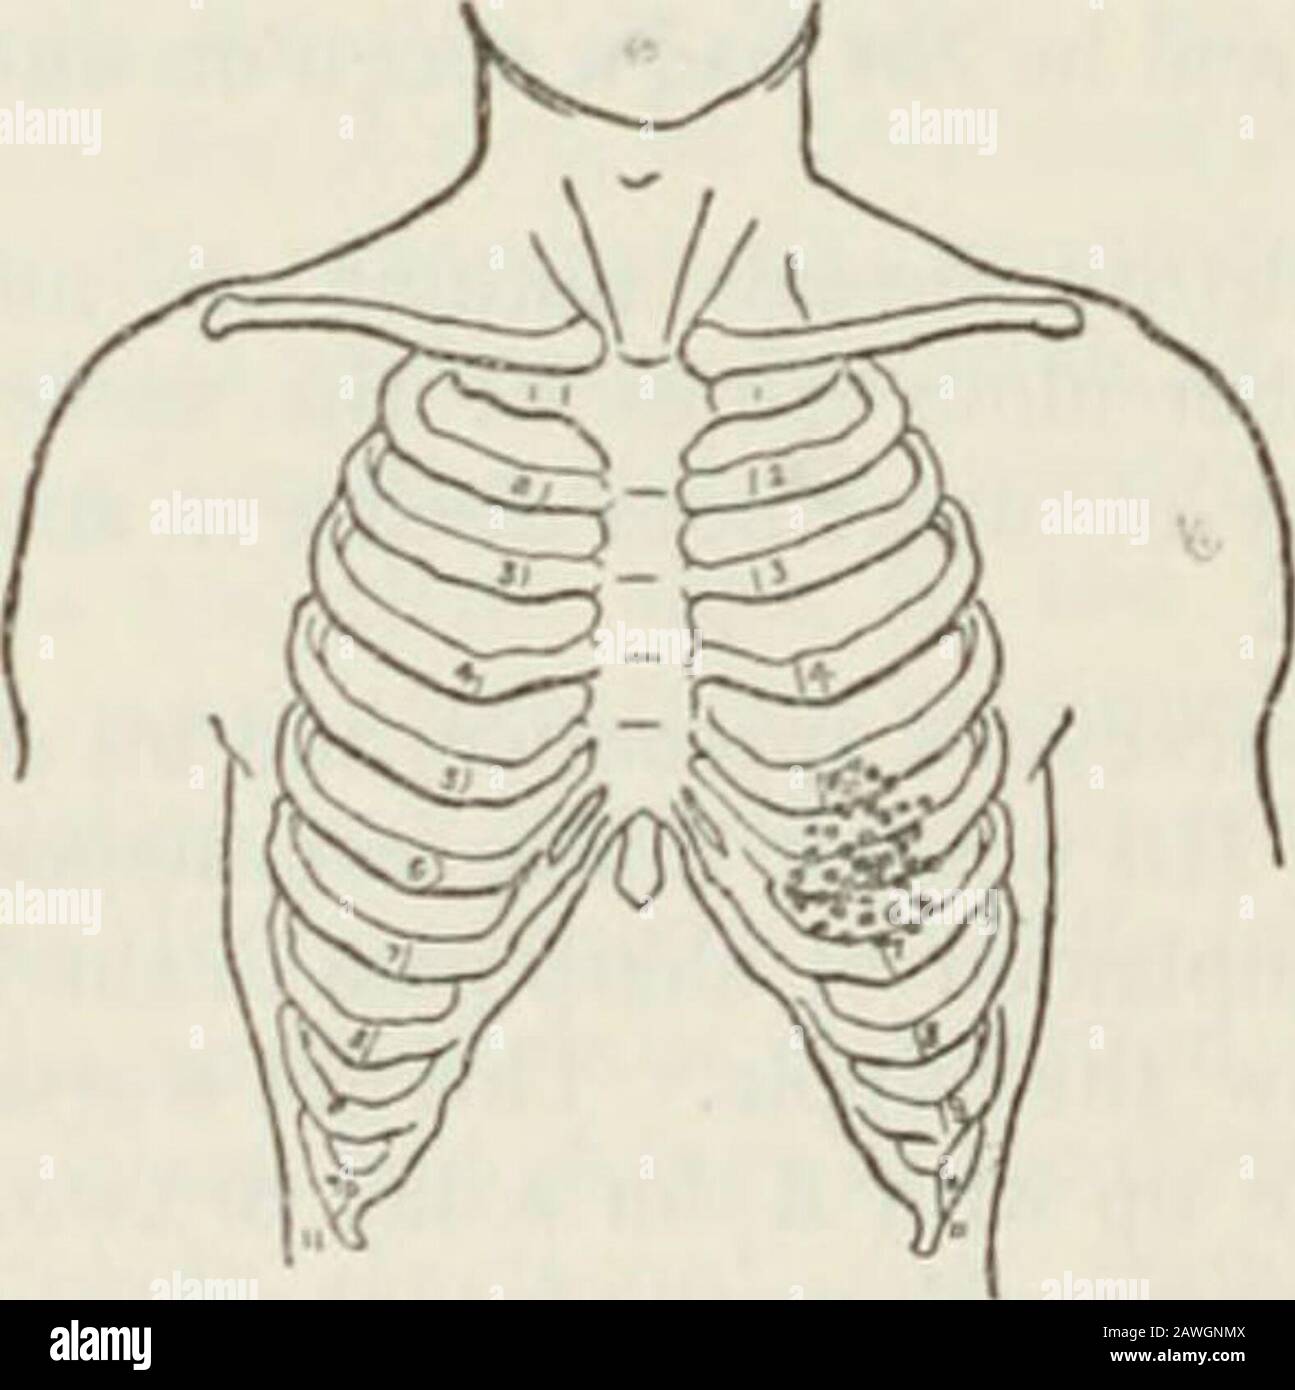 The Practitioner . Respiration 28 per minute, not laboured.He has a frequent cough, which is somewhat paroxysmal and isnot suppressed to any extent. He brings up small quantitiesof slightly frothy mucopurulent sputum. Examination of chest shows it to be rather flat but fairlywell formed. Expansion is equal on the two sides. Vocalfremitus is well marked everywhere, except over the left baseposteriorly, where it is slightly lessened. Percussion shows slight impairment of note over the leftbase posteriorly, and also a rather high-pitched note over theleft apex posteriorly. Palpation reveals the p Stock Photo